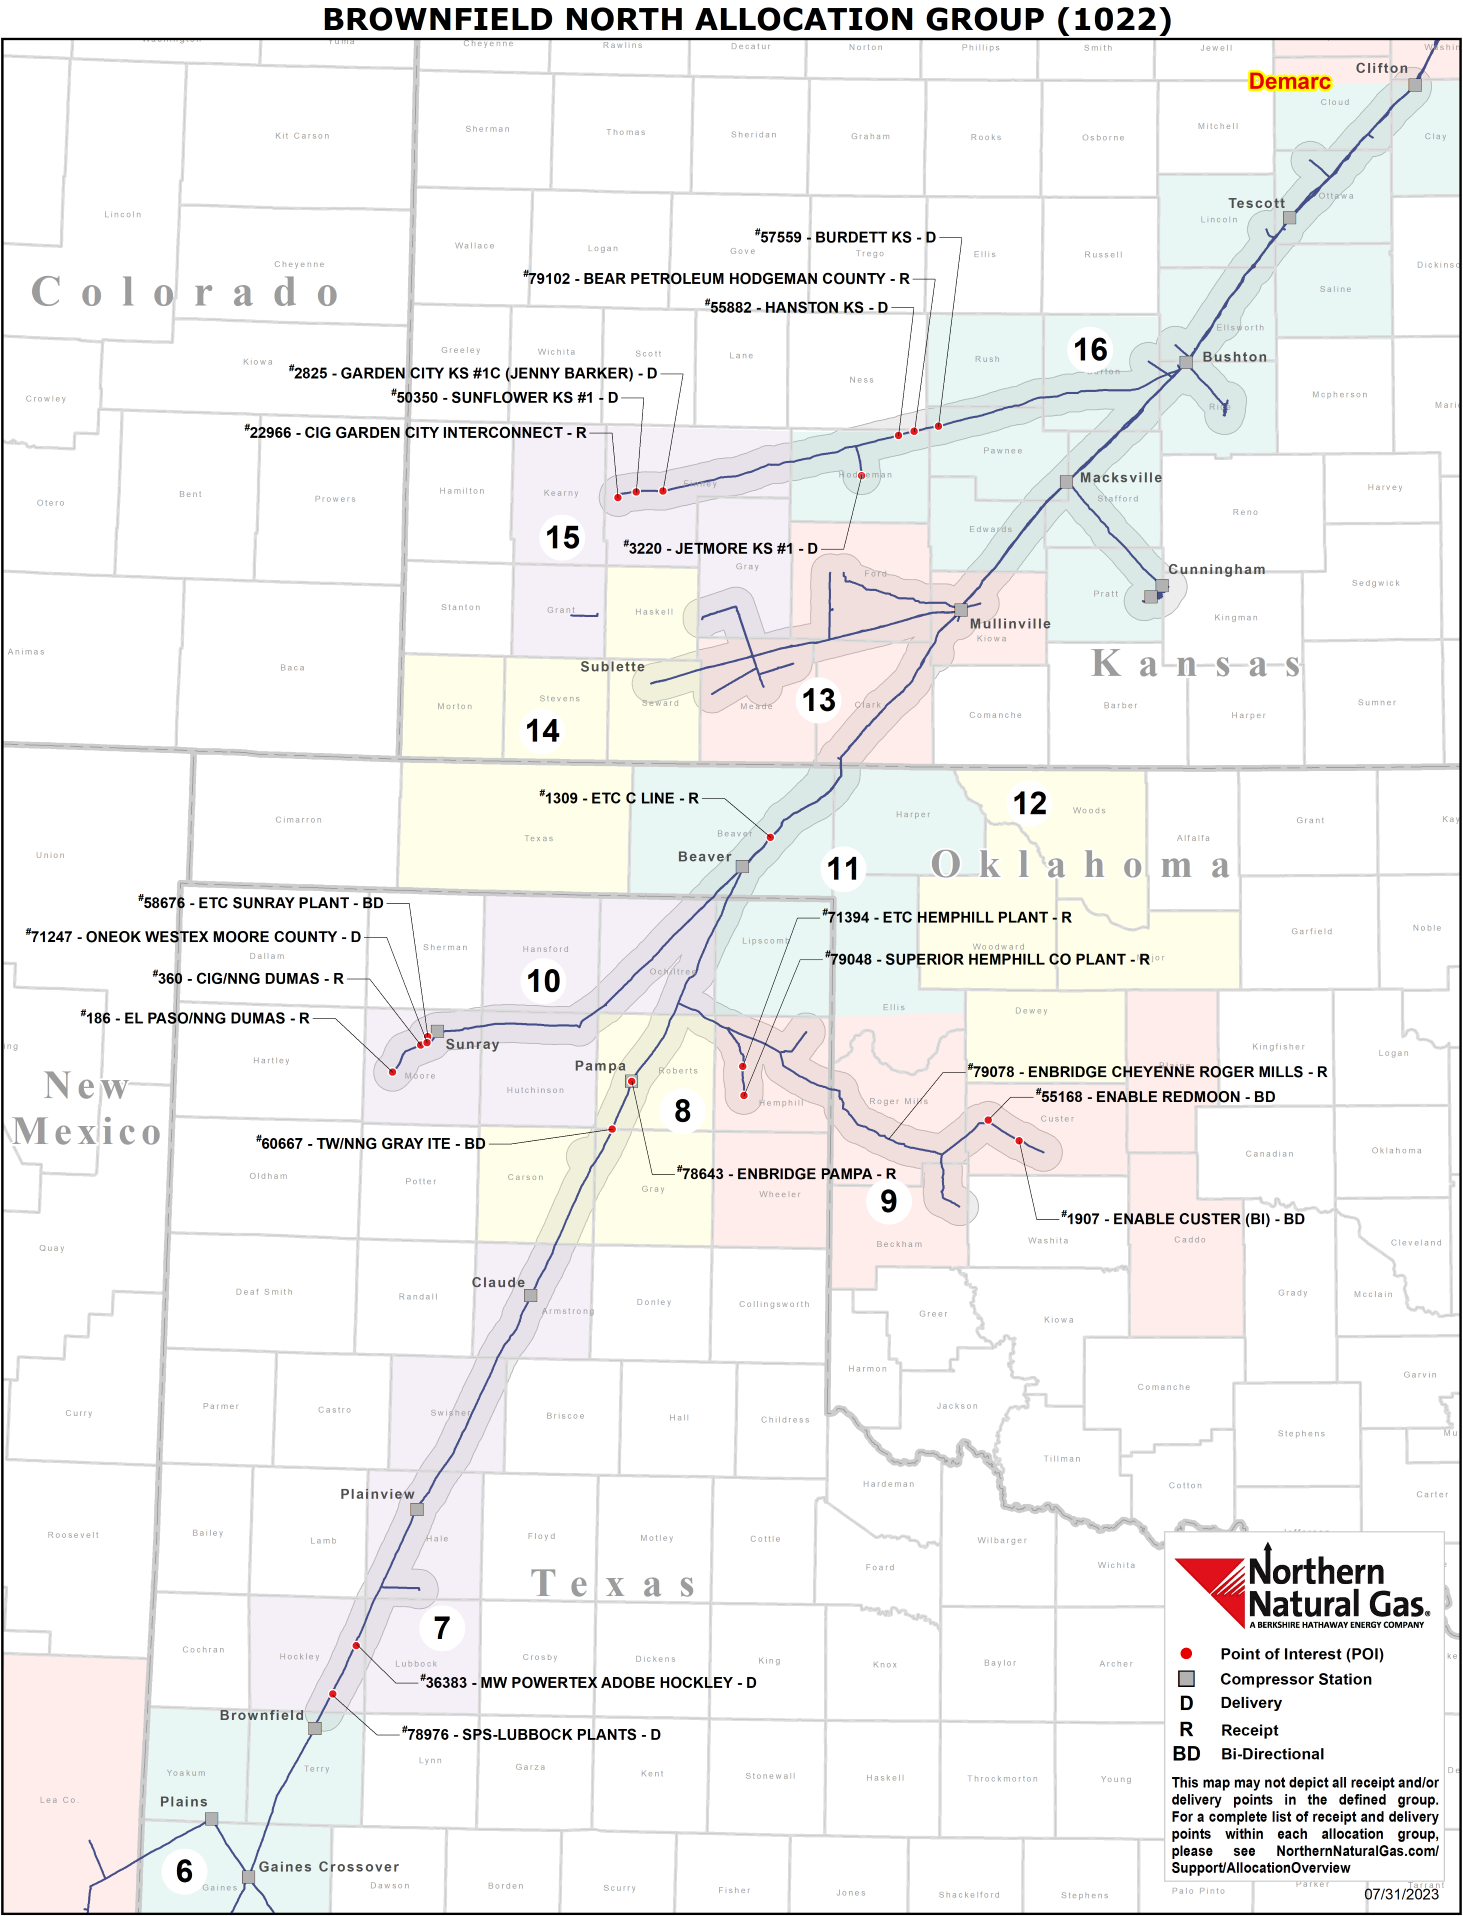 (1022) Brownfield North Allocation Group Map